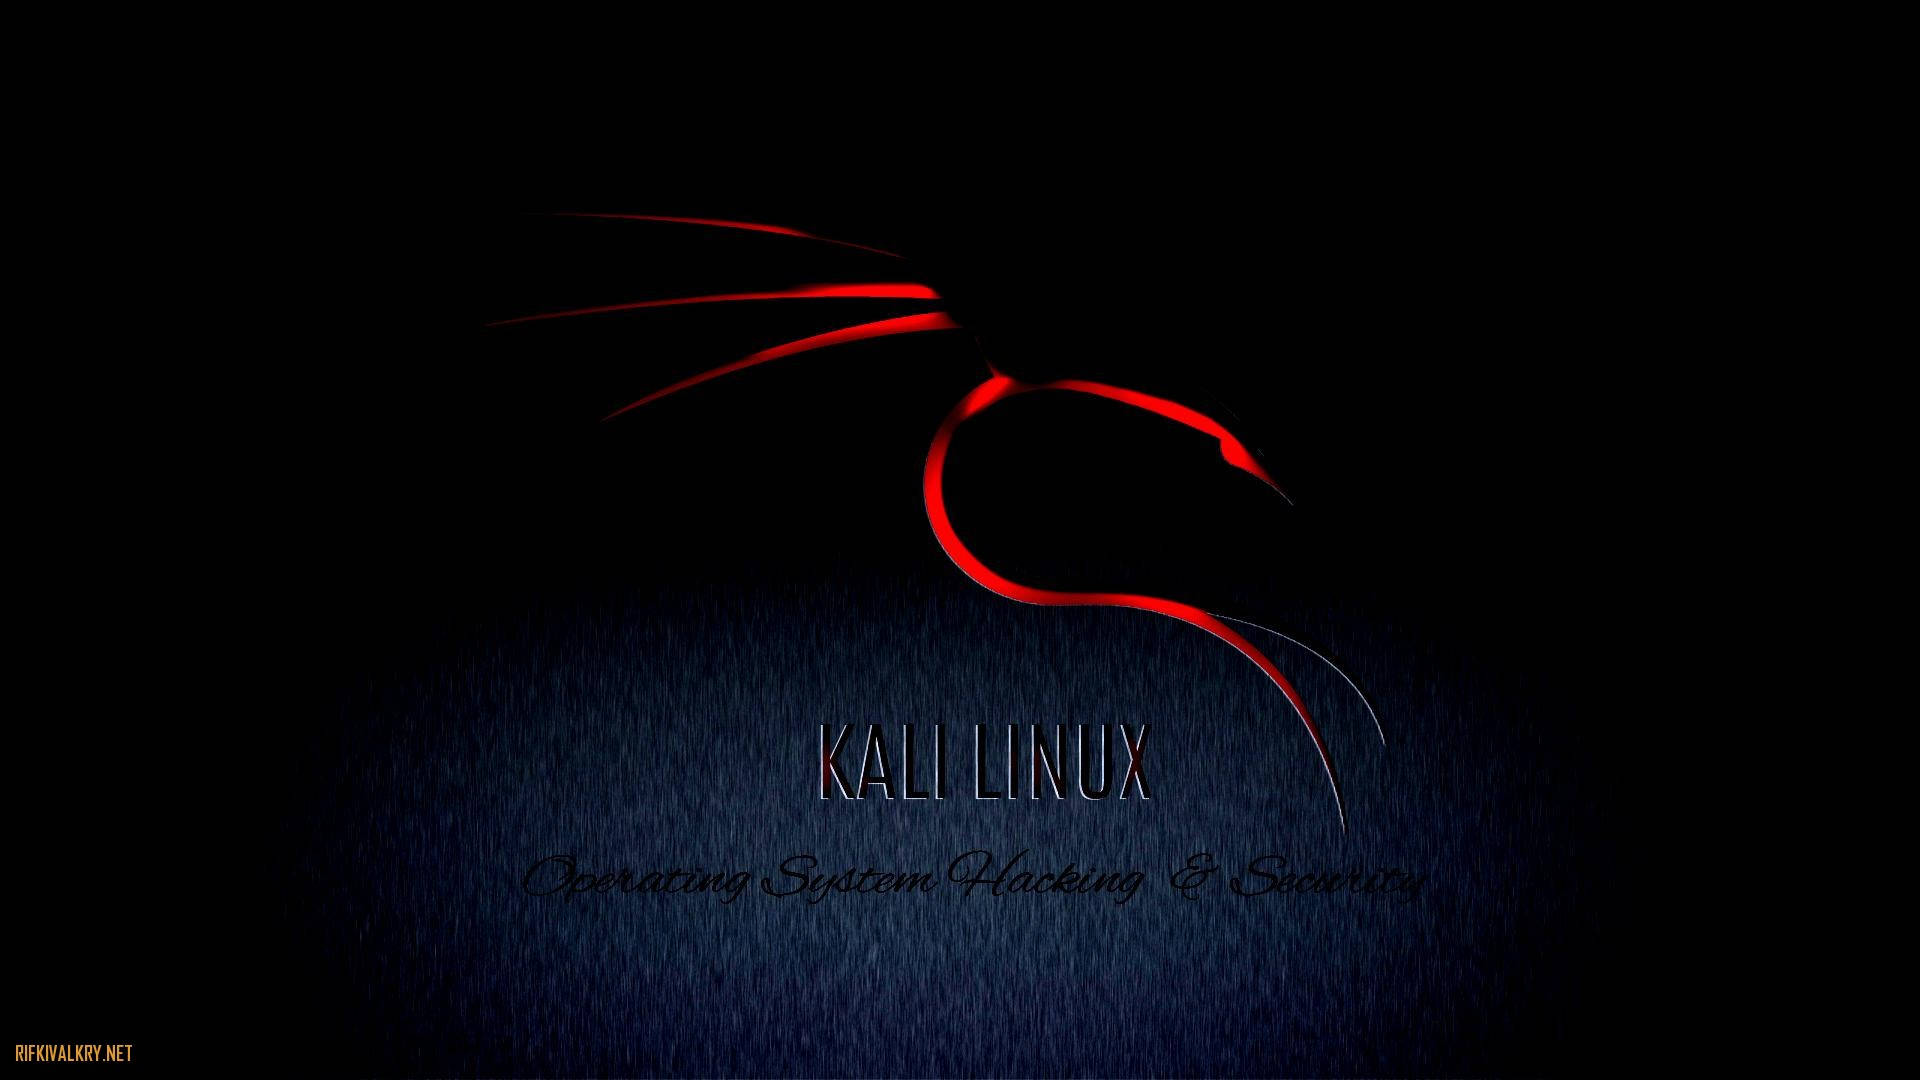 Black And Red Kali Linux Background